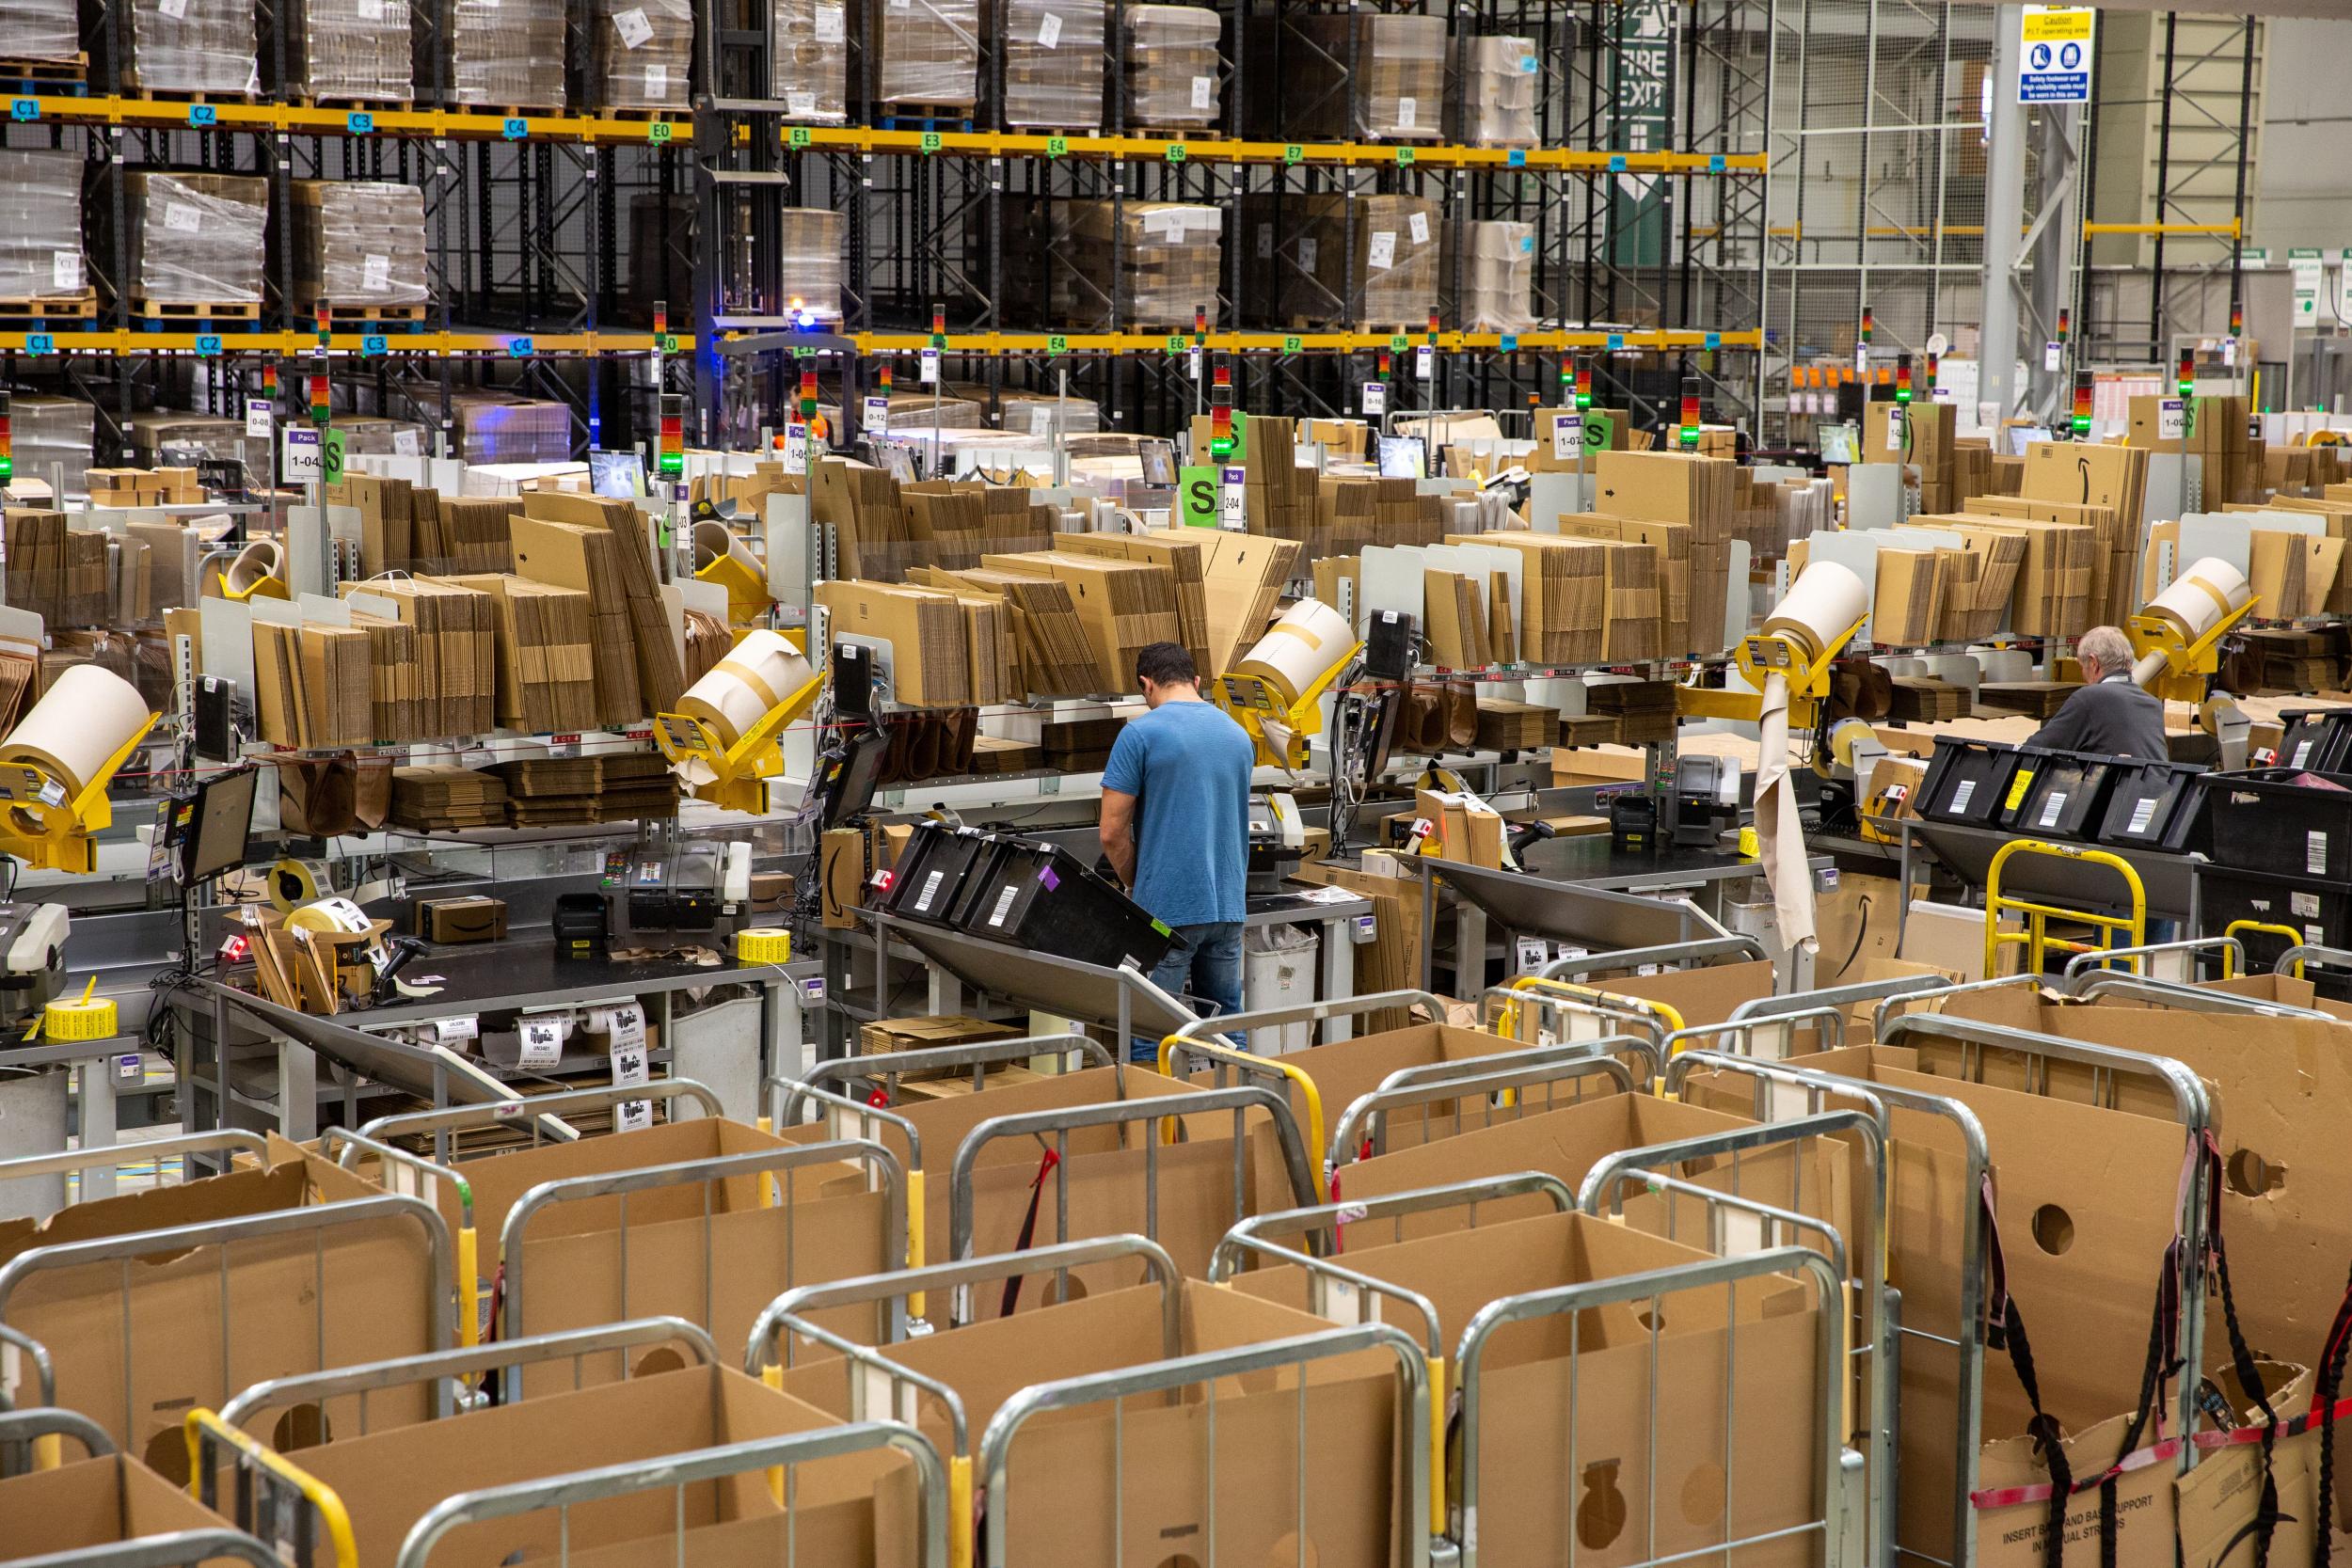 File: The California bill will require warehouse operators such as Amazon, Walmart and Target to disclose productivity quotas and work speed metrics